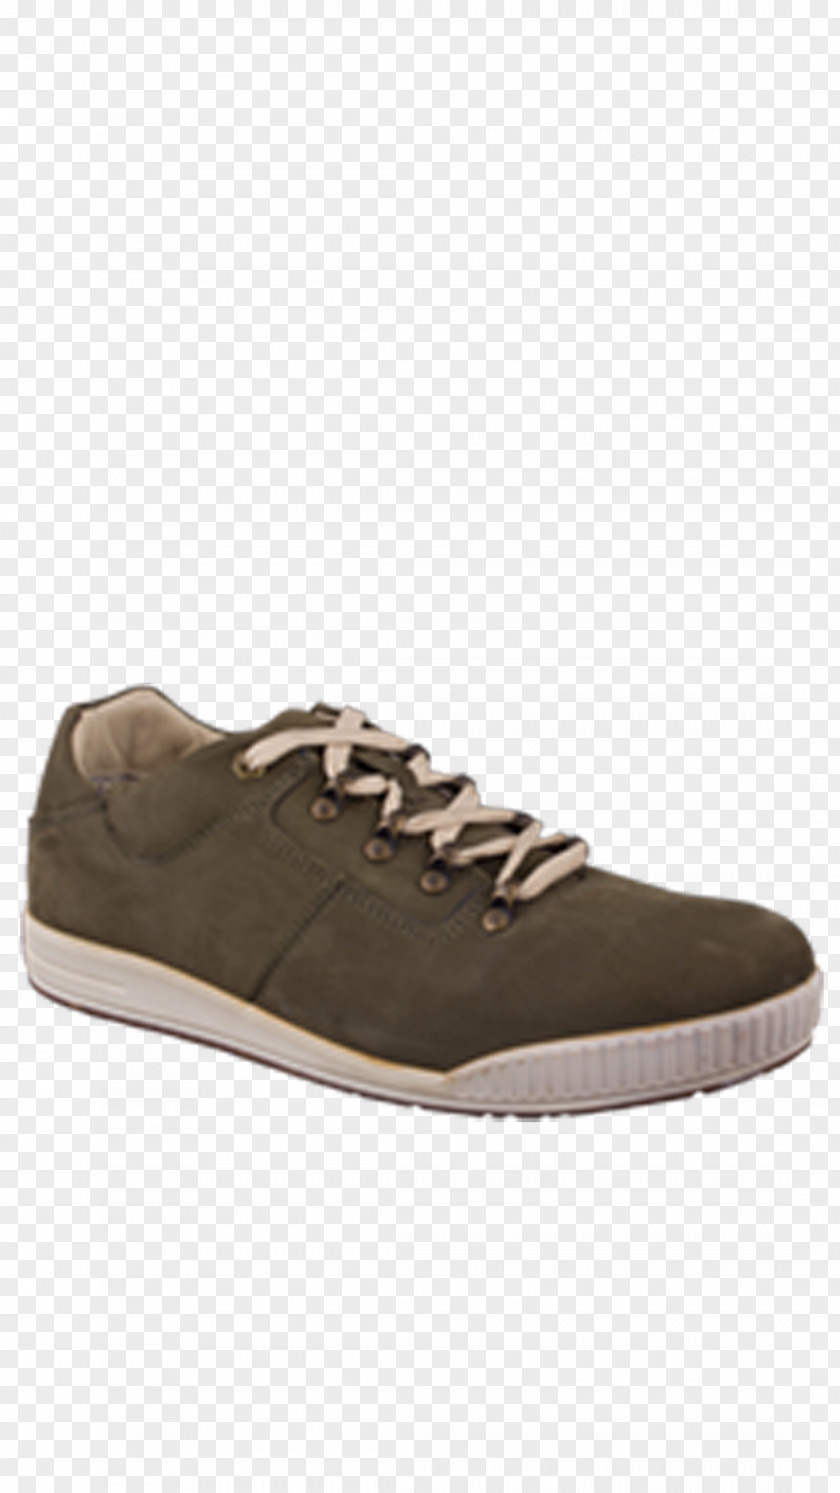 Olive Green Dress Shoes For Women Sports Casual Wear Online Shopping PNG